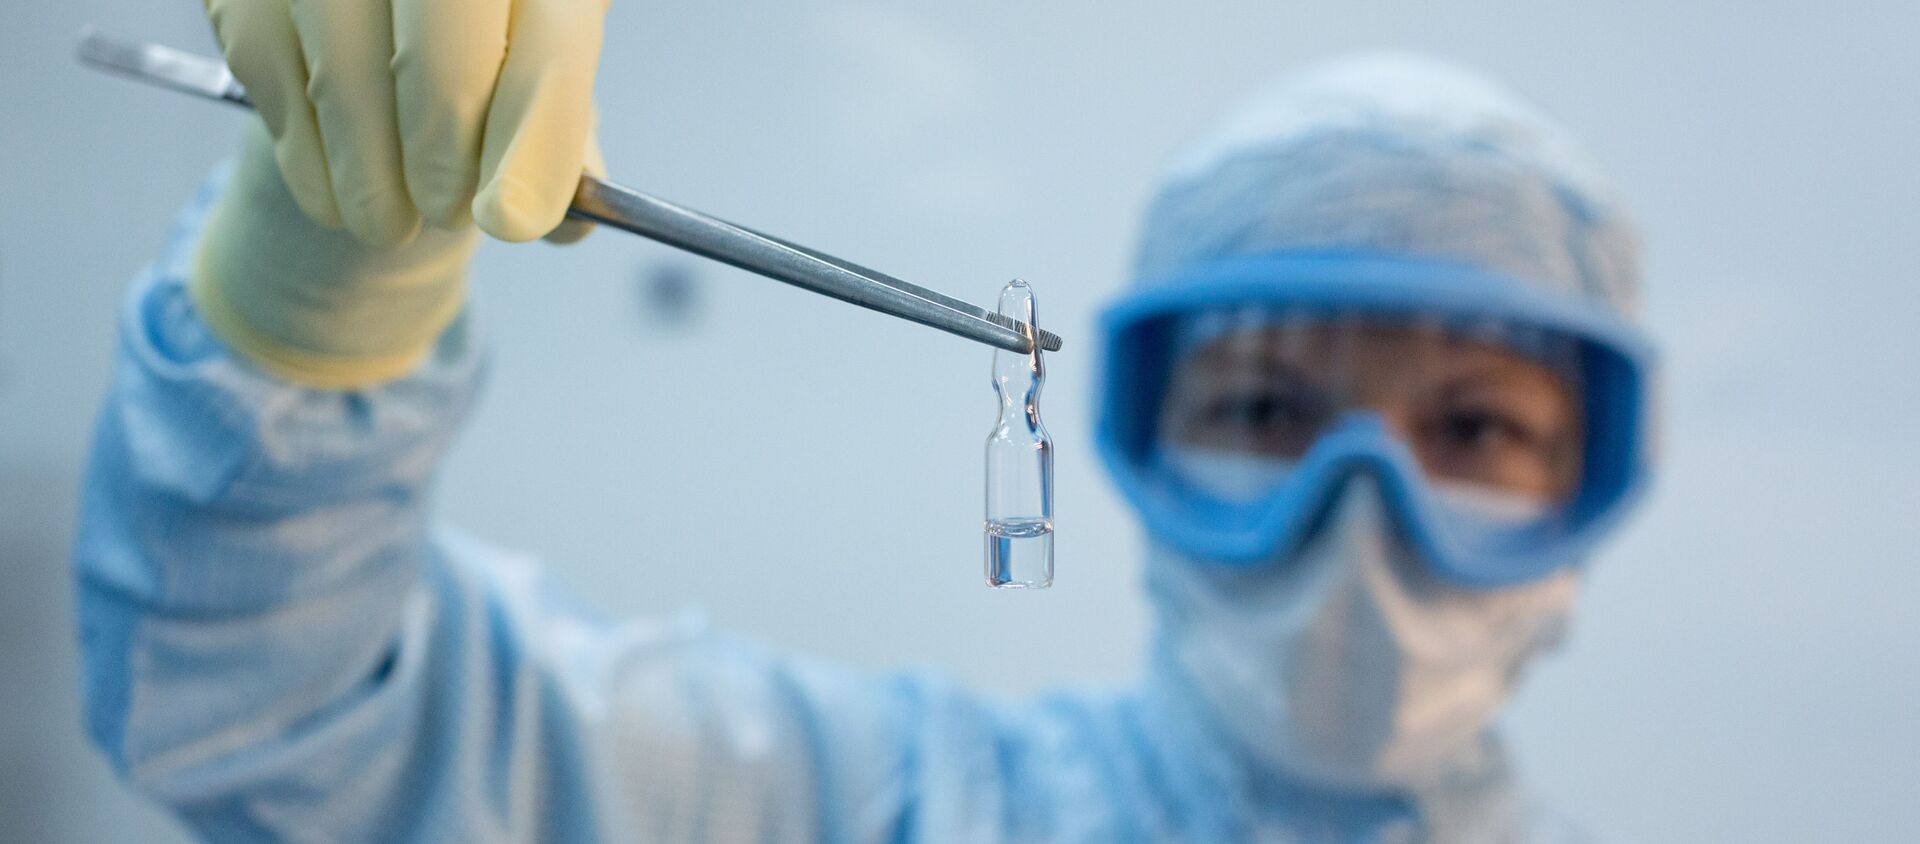 A handout photo shows an employee demonstrating a vial with Gam-COVID-Vac vaccine against the coronavirus disease (COVID-19), developed by the Gamaleya National Research Institute of Epidemiology and Microbiology and the Russian Direct Investment Fund (RDIF), during its production at Binnopharm pharmaceutical company in Zelenograd near Moscow, Russia August 7, 2020 - Sputnik International, 1920